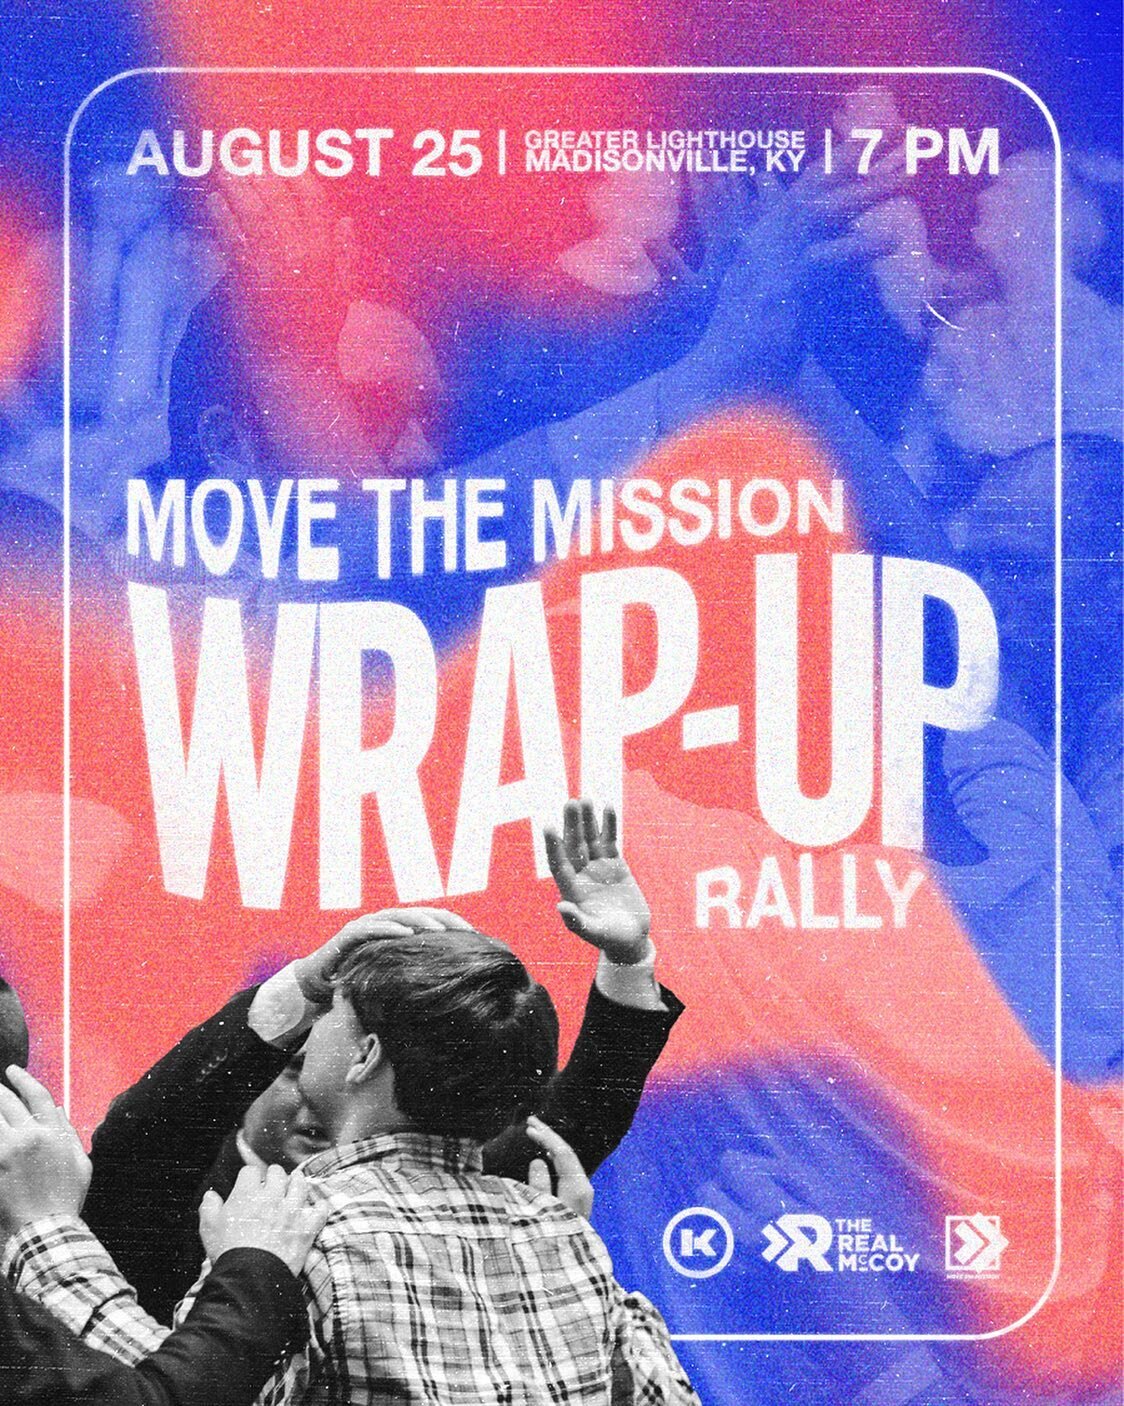 ‼️MTM Wrap-Up Rally‼️

Join us on August 25th @ 7 PM (CST) at Greater Lighthouse Apostolic Church in Madisonville, KY for our annual #MTM Wrap-Up Rally!

You don&rsquo;t want to miss it!